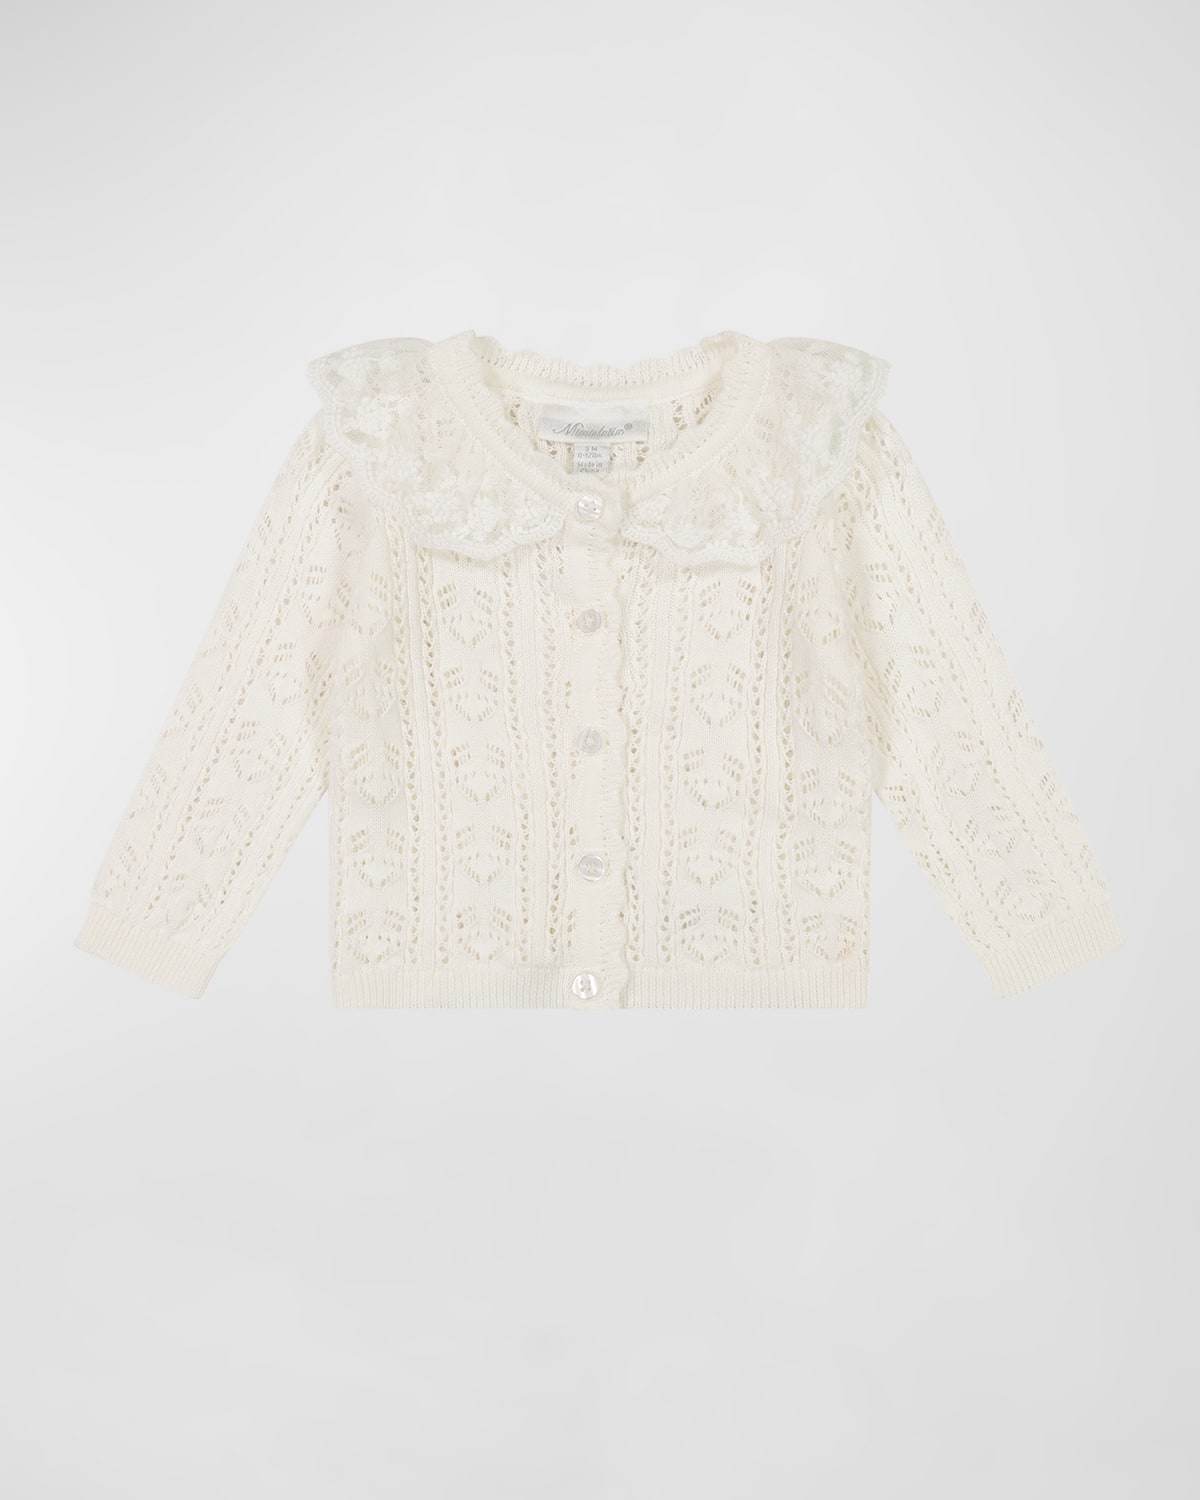 Girl's Crotched Lace Trim Cardigan, Size 3M-18M